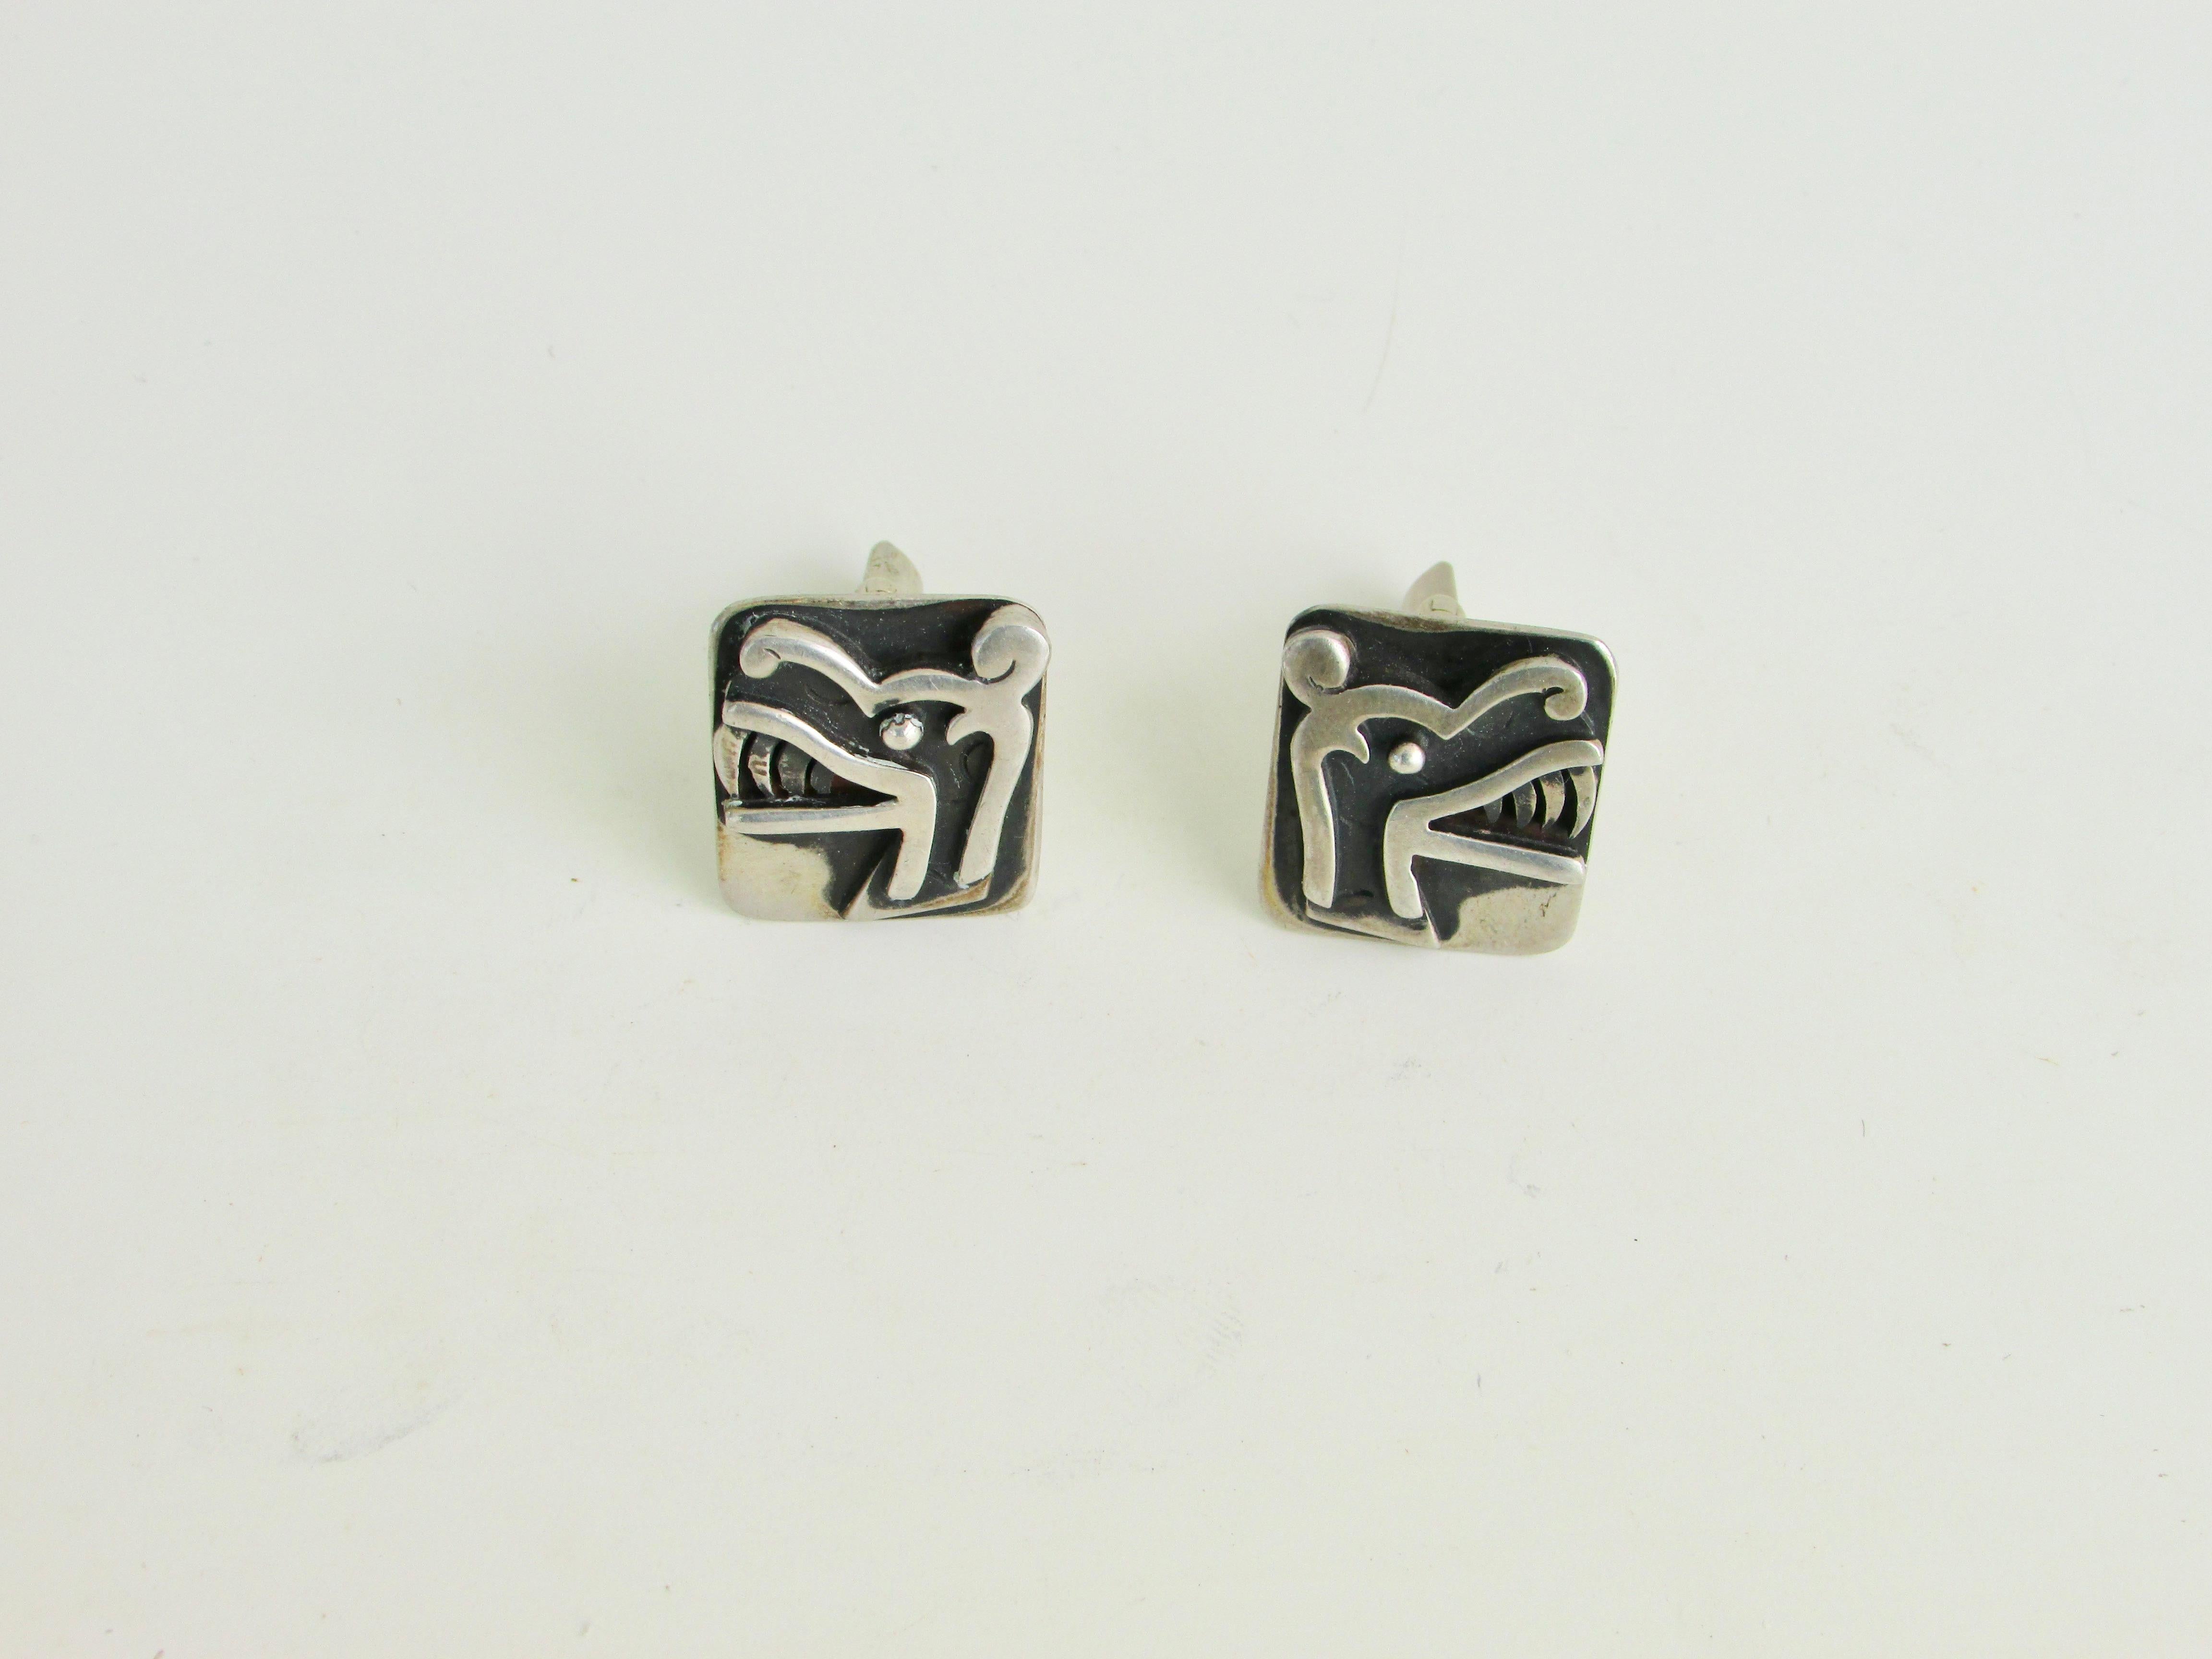 Pair of Miguel Garcia Martinez Modernist Taxco Mexico Sterling Cuff Links For Sale 1